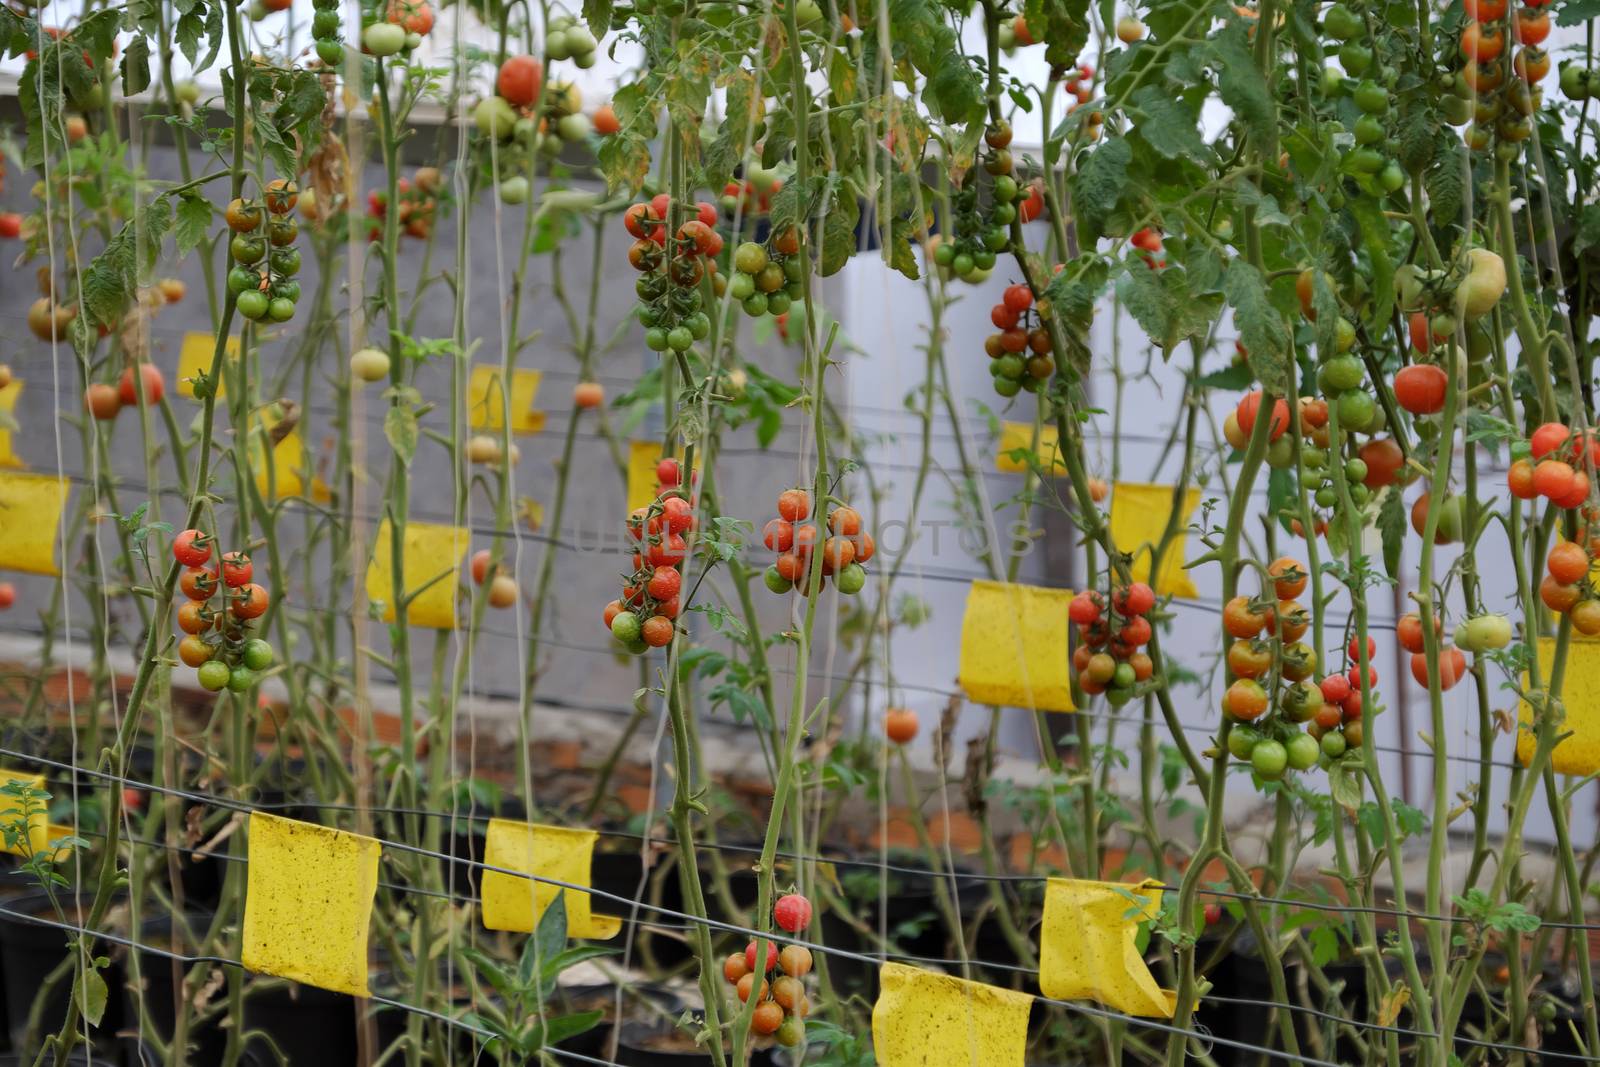 Safe vegetable farm at Da Lat, Viet Nam, red tomato with high tech agriculture in greenhouse, amazing tomato garden to make safe food